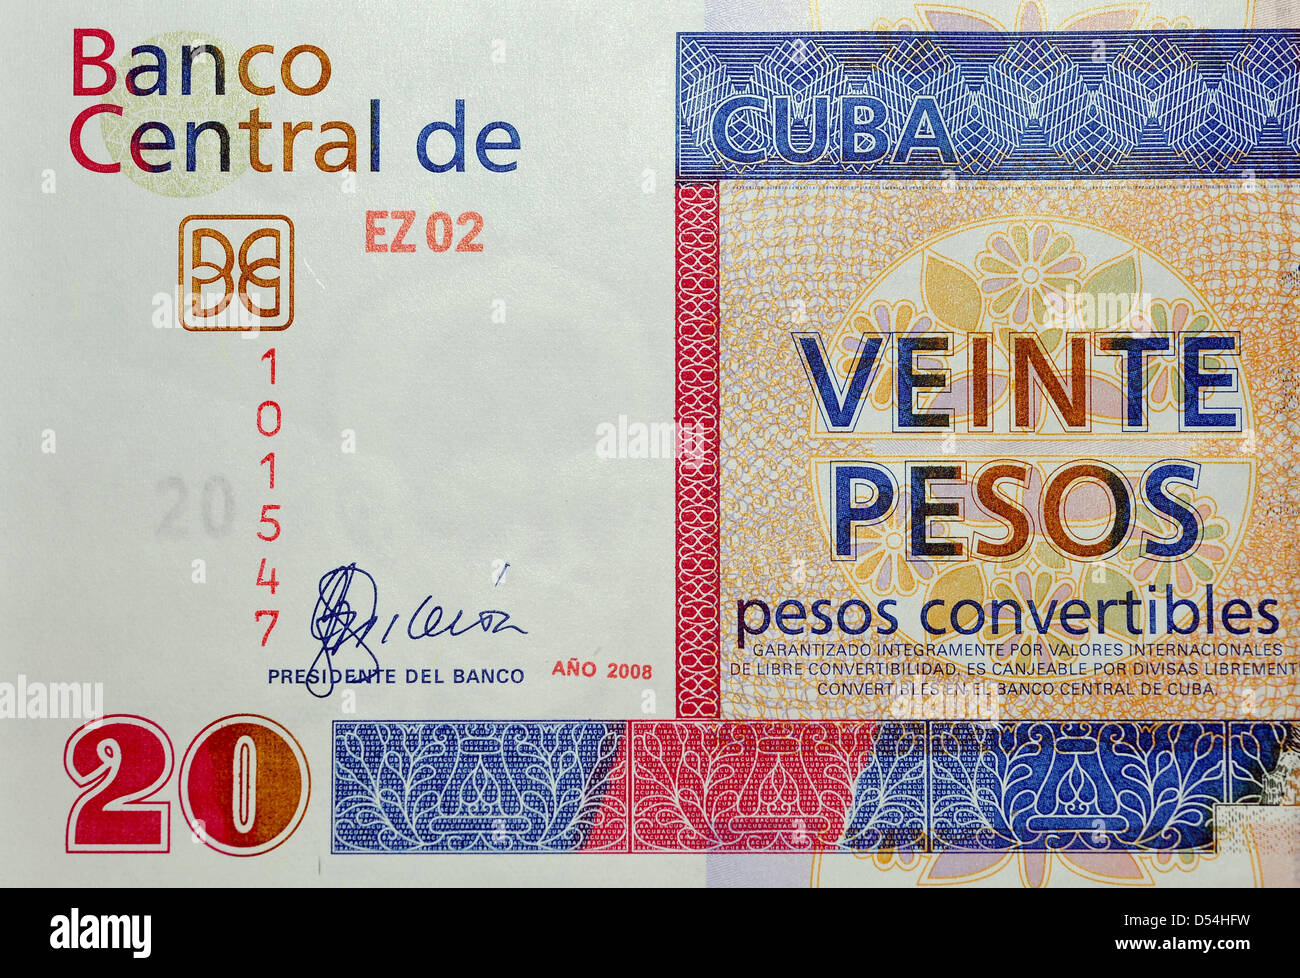 March 20, 2013 - Havana, Cuba - A Cuban Convertible 20 Peso (CUC) bill is seen in Havana, Cuba on Tuesday, March 19, 2013. Currently, the CUC has an exchange rate of $1.00 despite the fact that US Dollars are not accepted anywhere in Cuba. (Credit Image: © Josh Edelson/ZUMAPRESS.com) Stock Photo